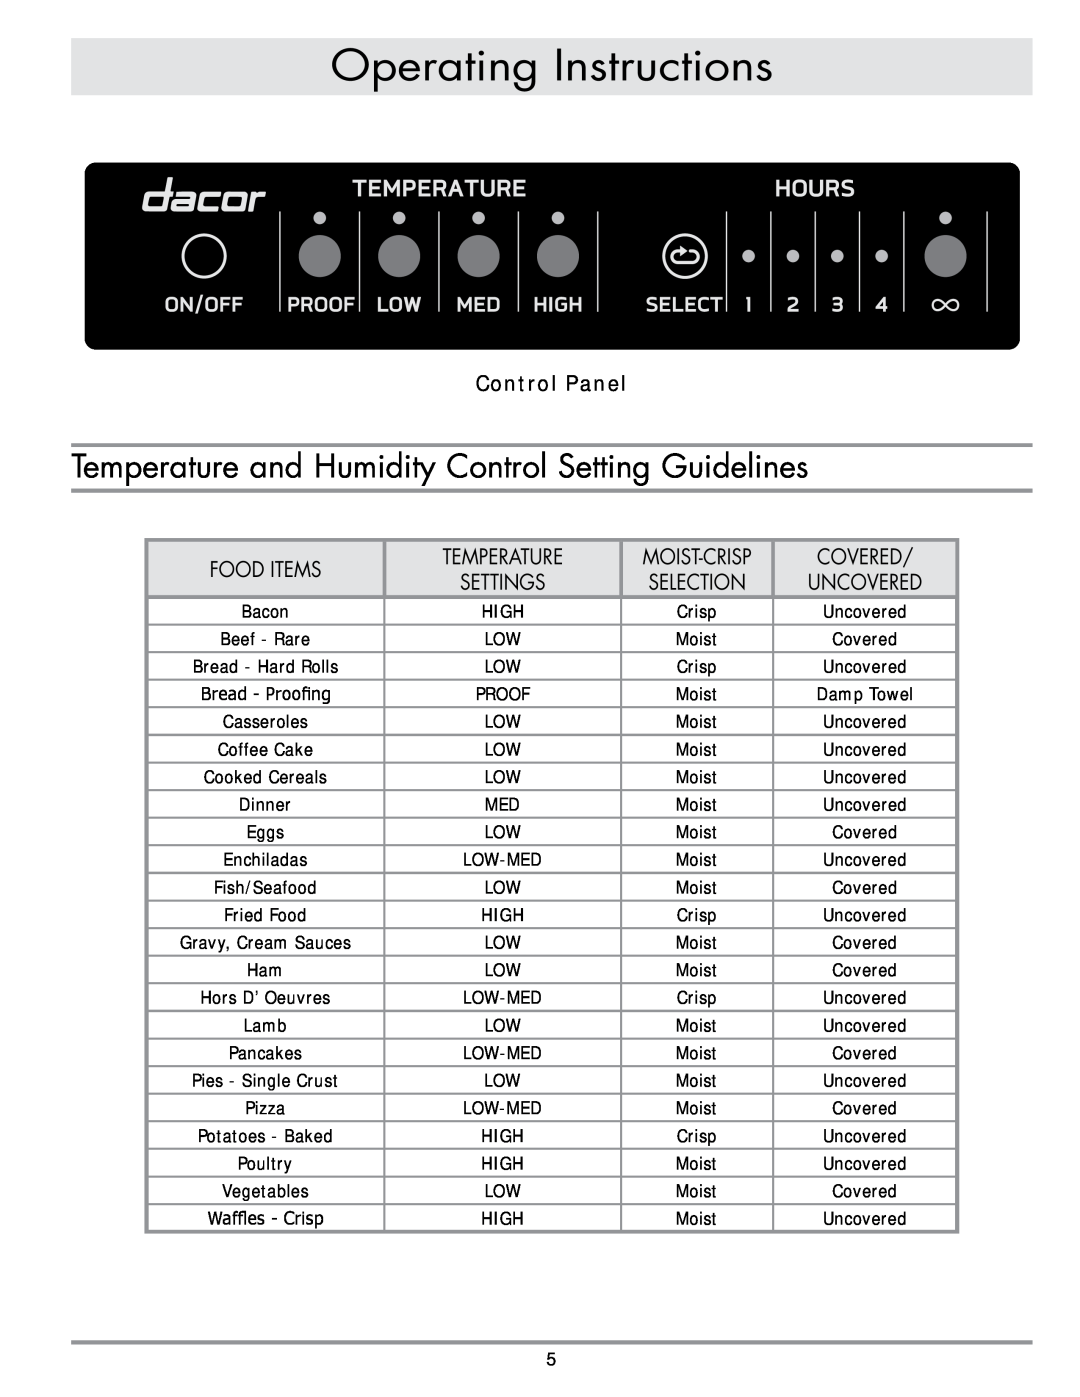 Dacor MRWD27, MRWD30 Operating Instructions, Control Panel, Food Items, Temperature Settings, Moist-Crisp Selection 